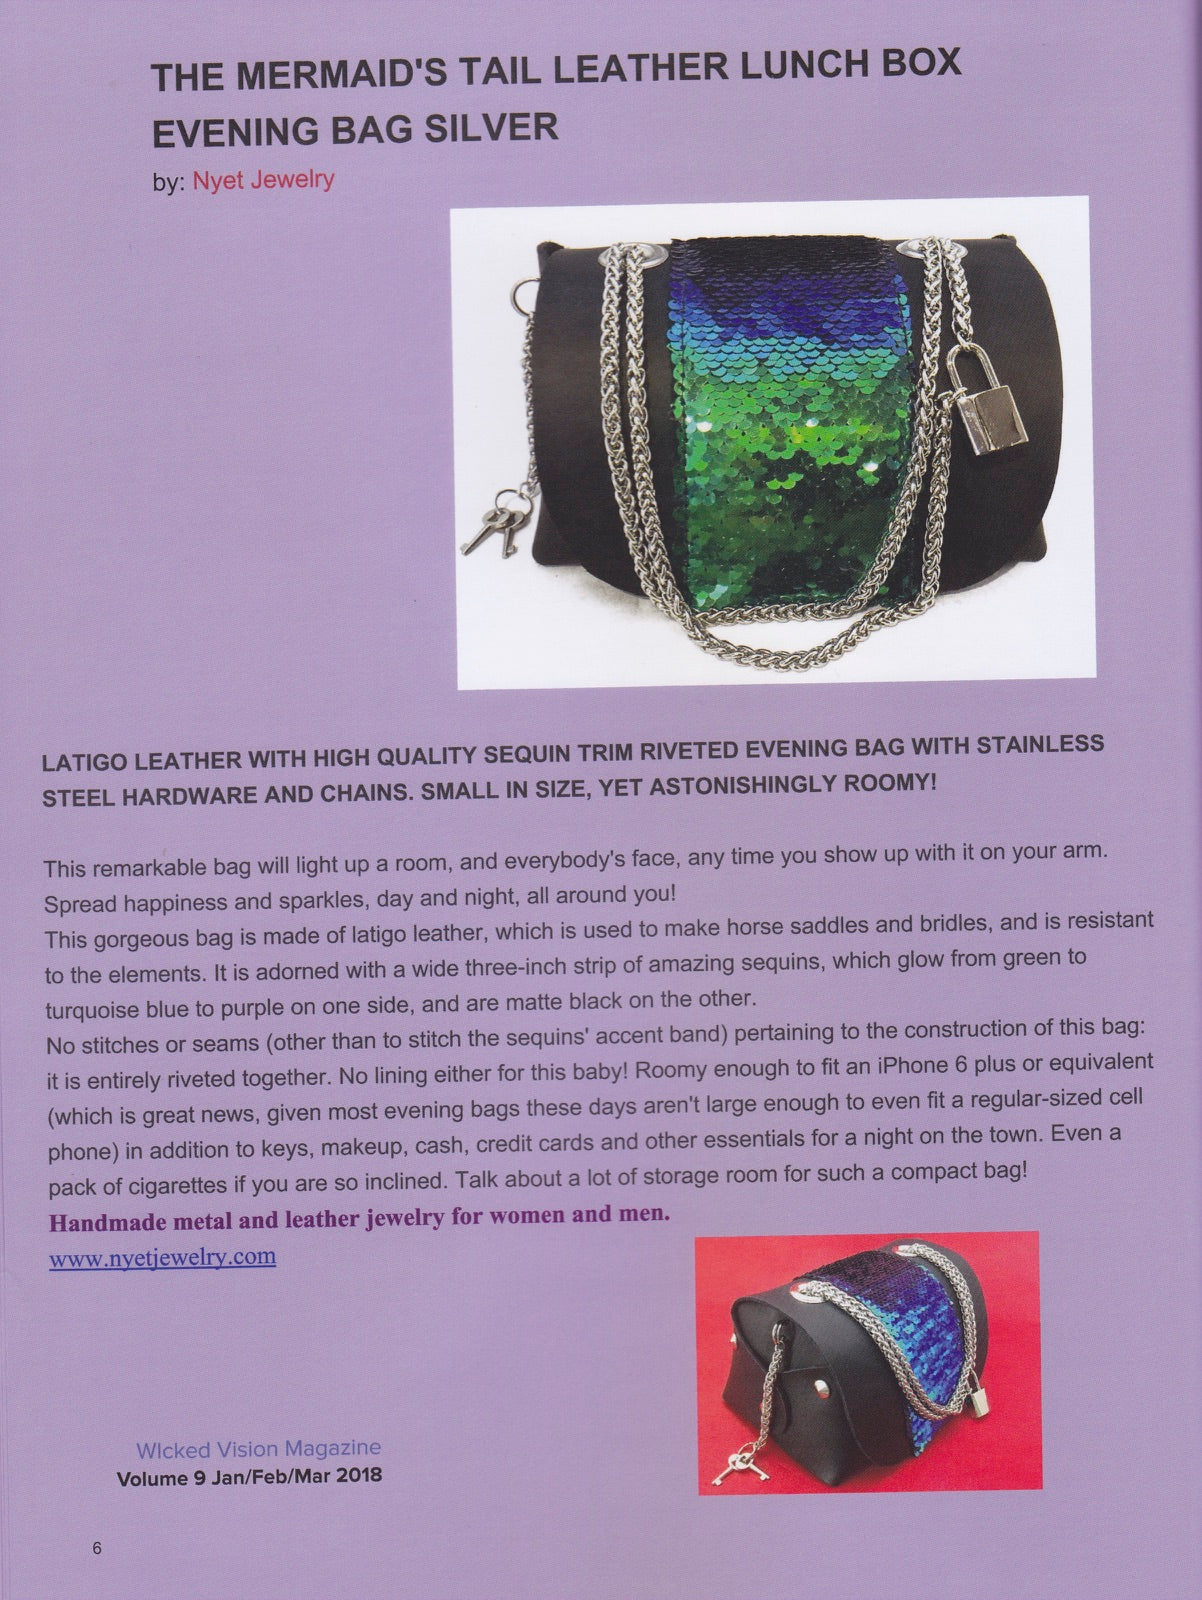 NYET JEWELRY IN WICKED VISION VOLUME 9 SPRING 2018